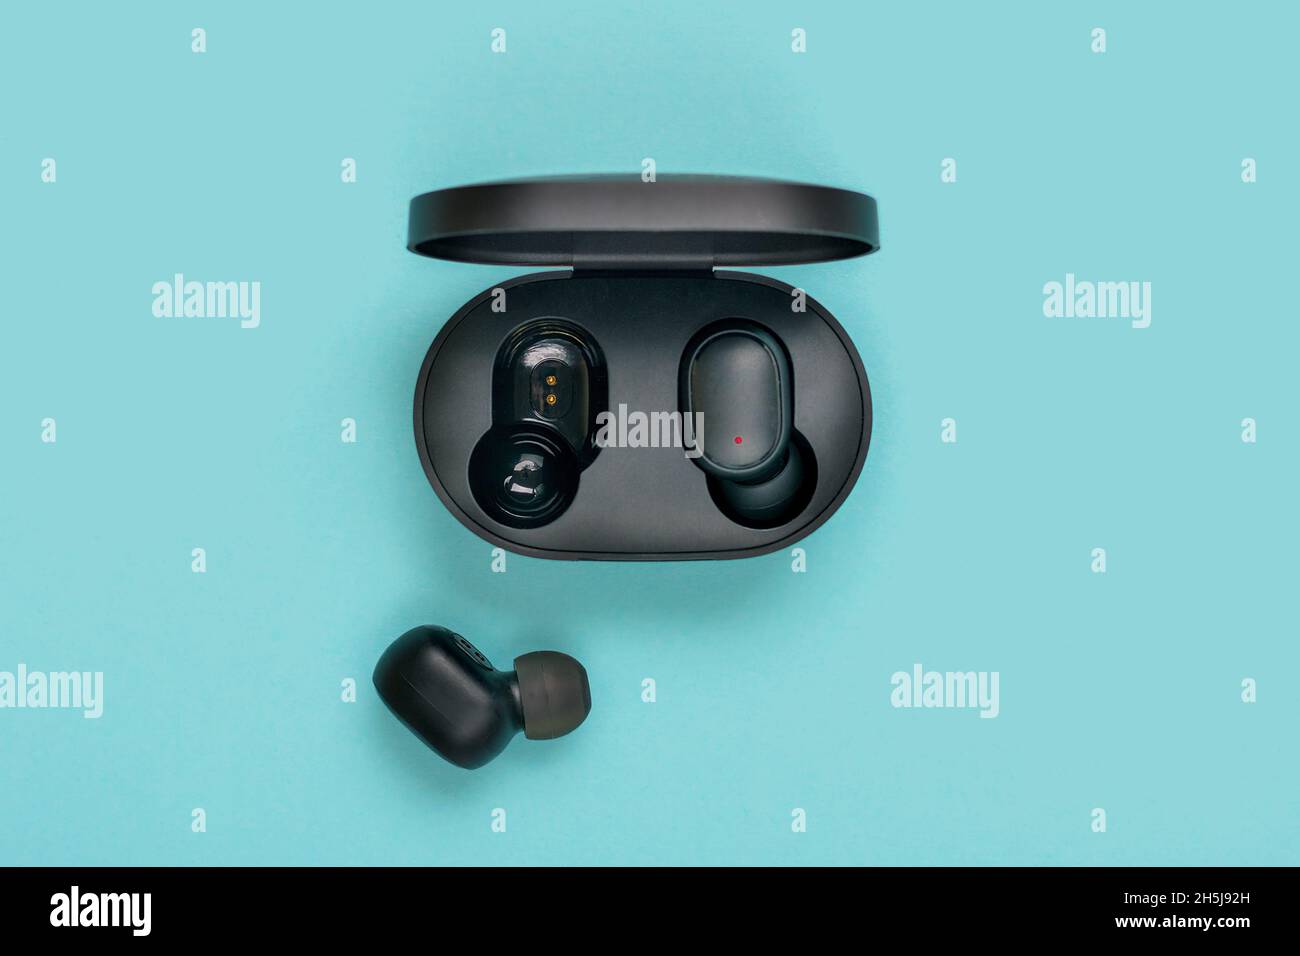 wireless earbuds Can be used for bilateral calls and digital sound quality is assured with its DSP digital noise reduction and capsule on blue Stock Photo